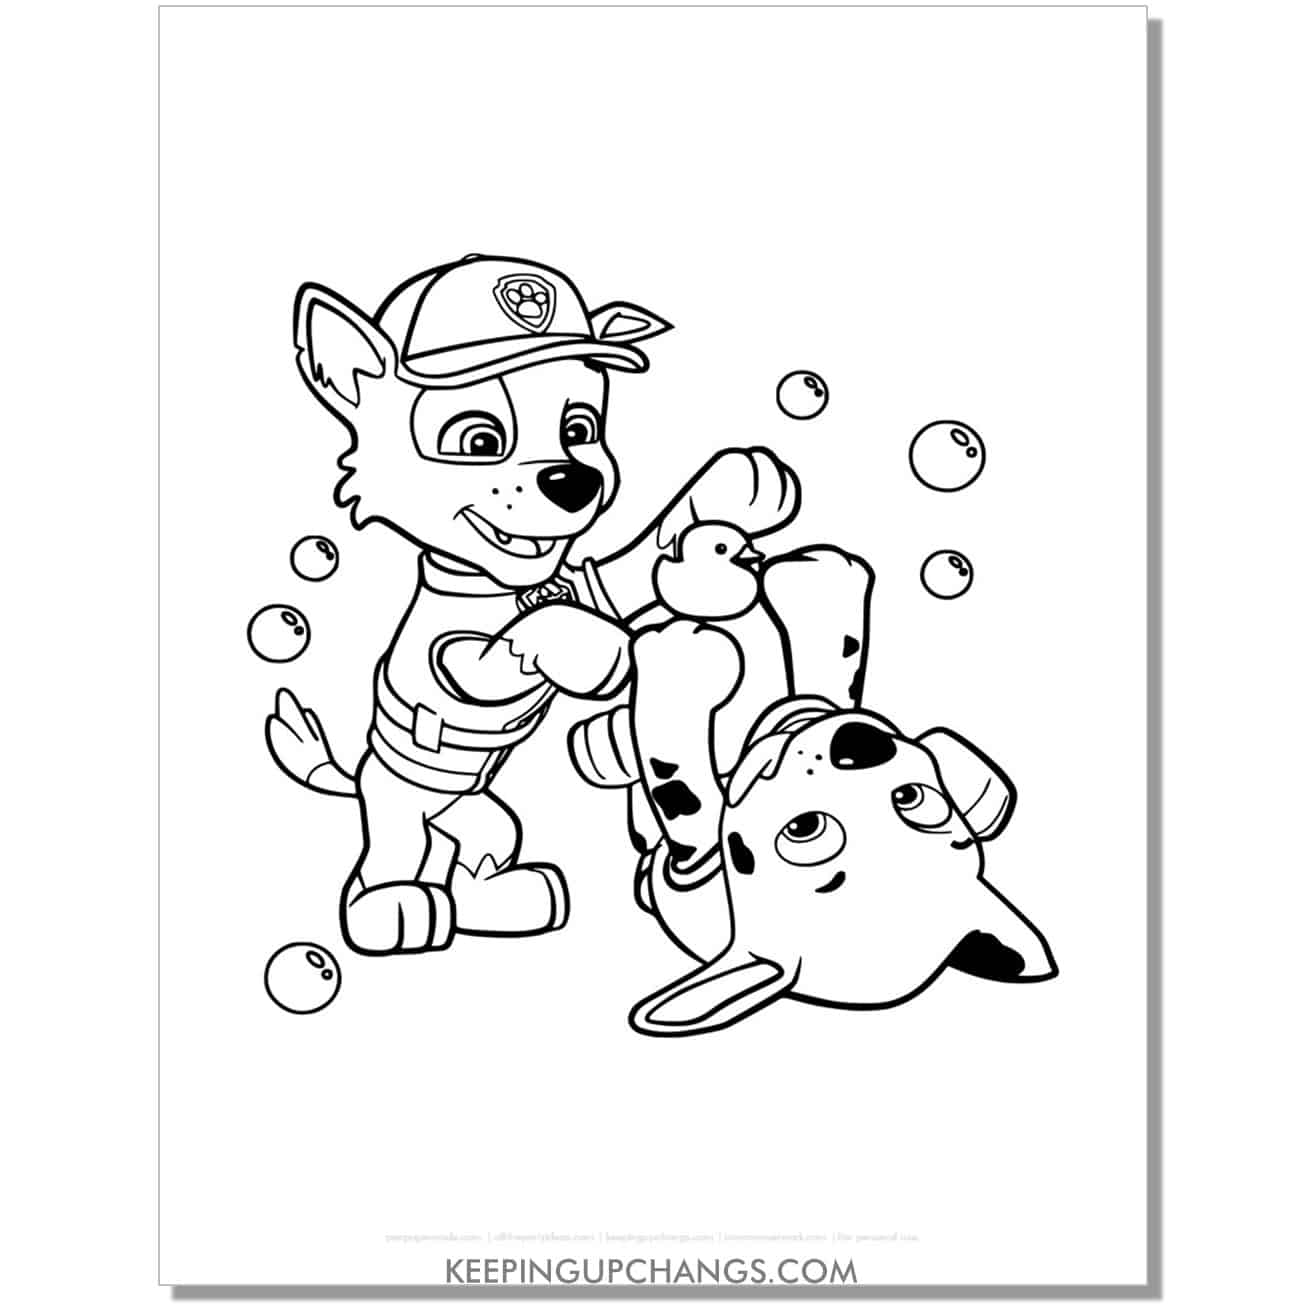 free rocky and marshall playing paw patrol coloring page, sheet.